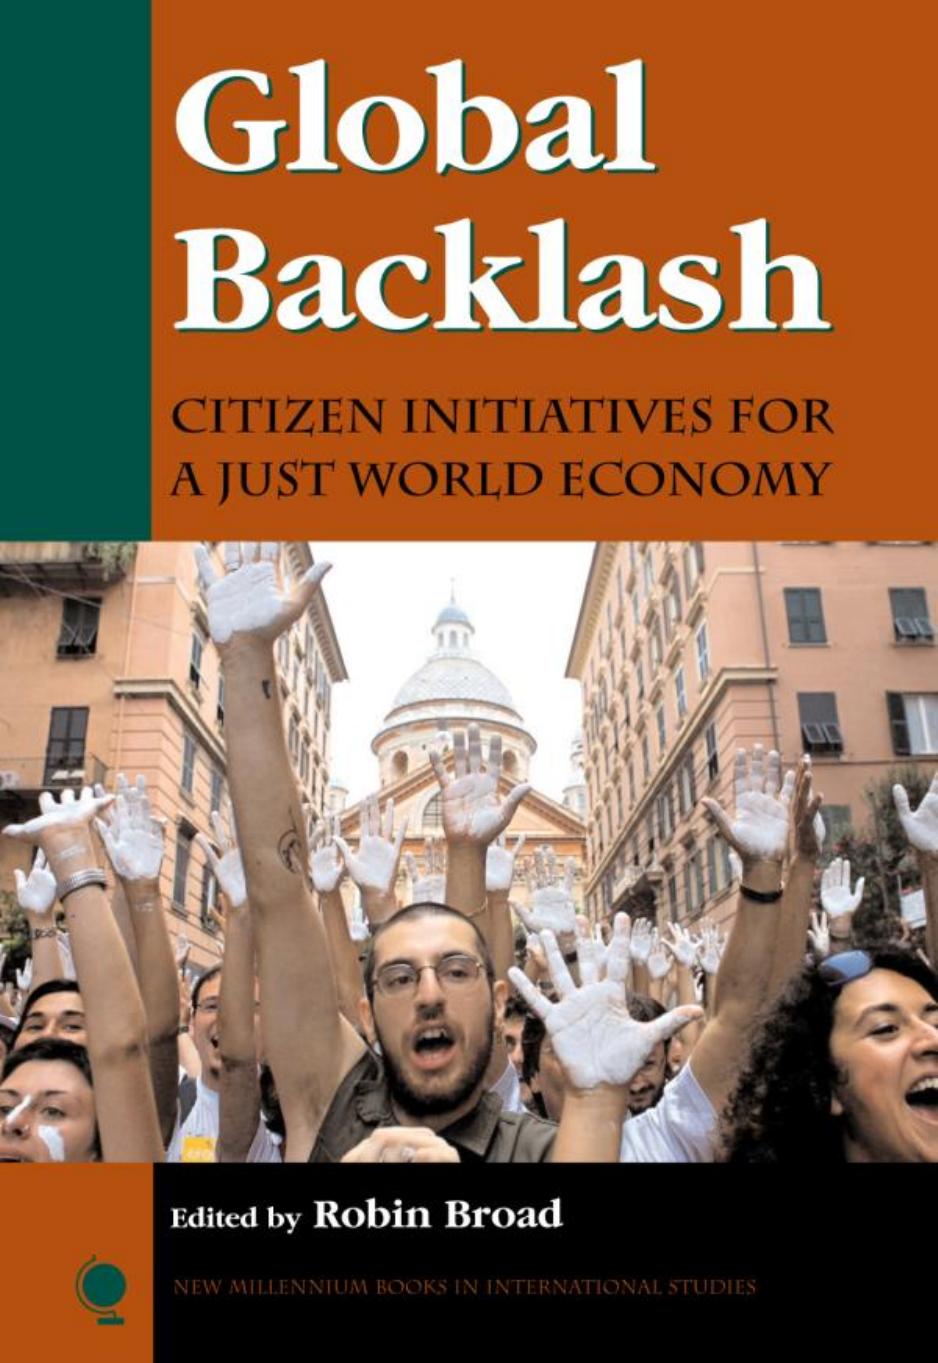 Global Backlash: Citizen Initiatives for a Just World Economy by Robin Broad (editor)